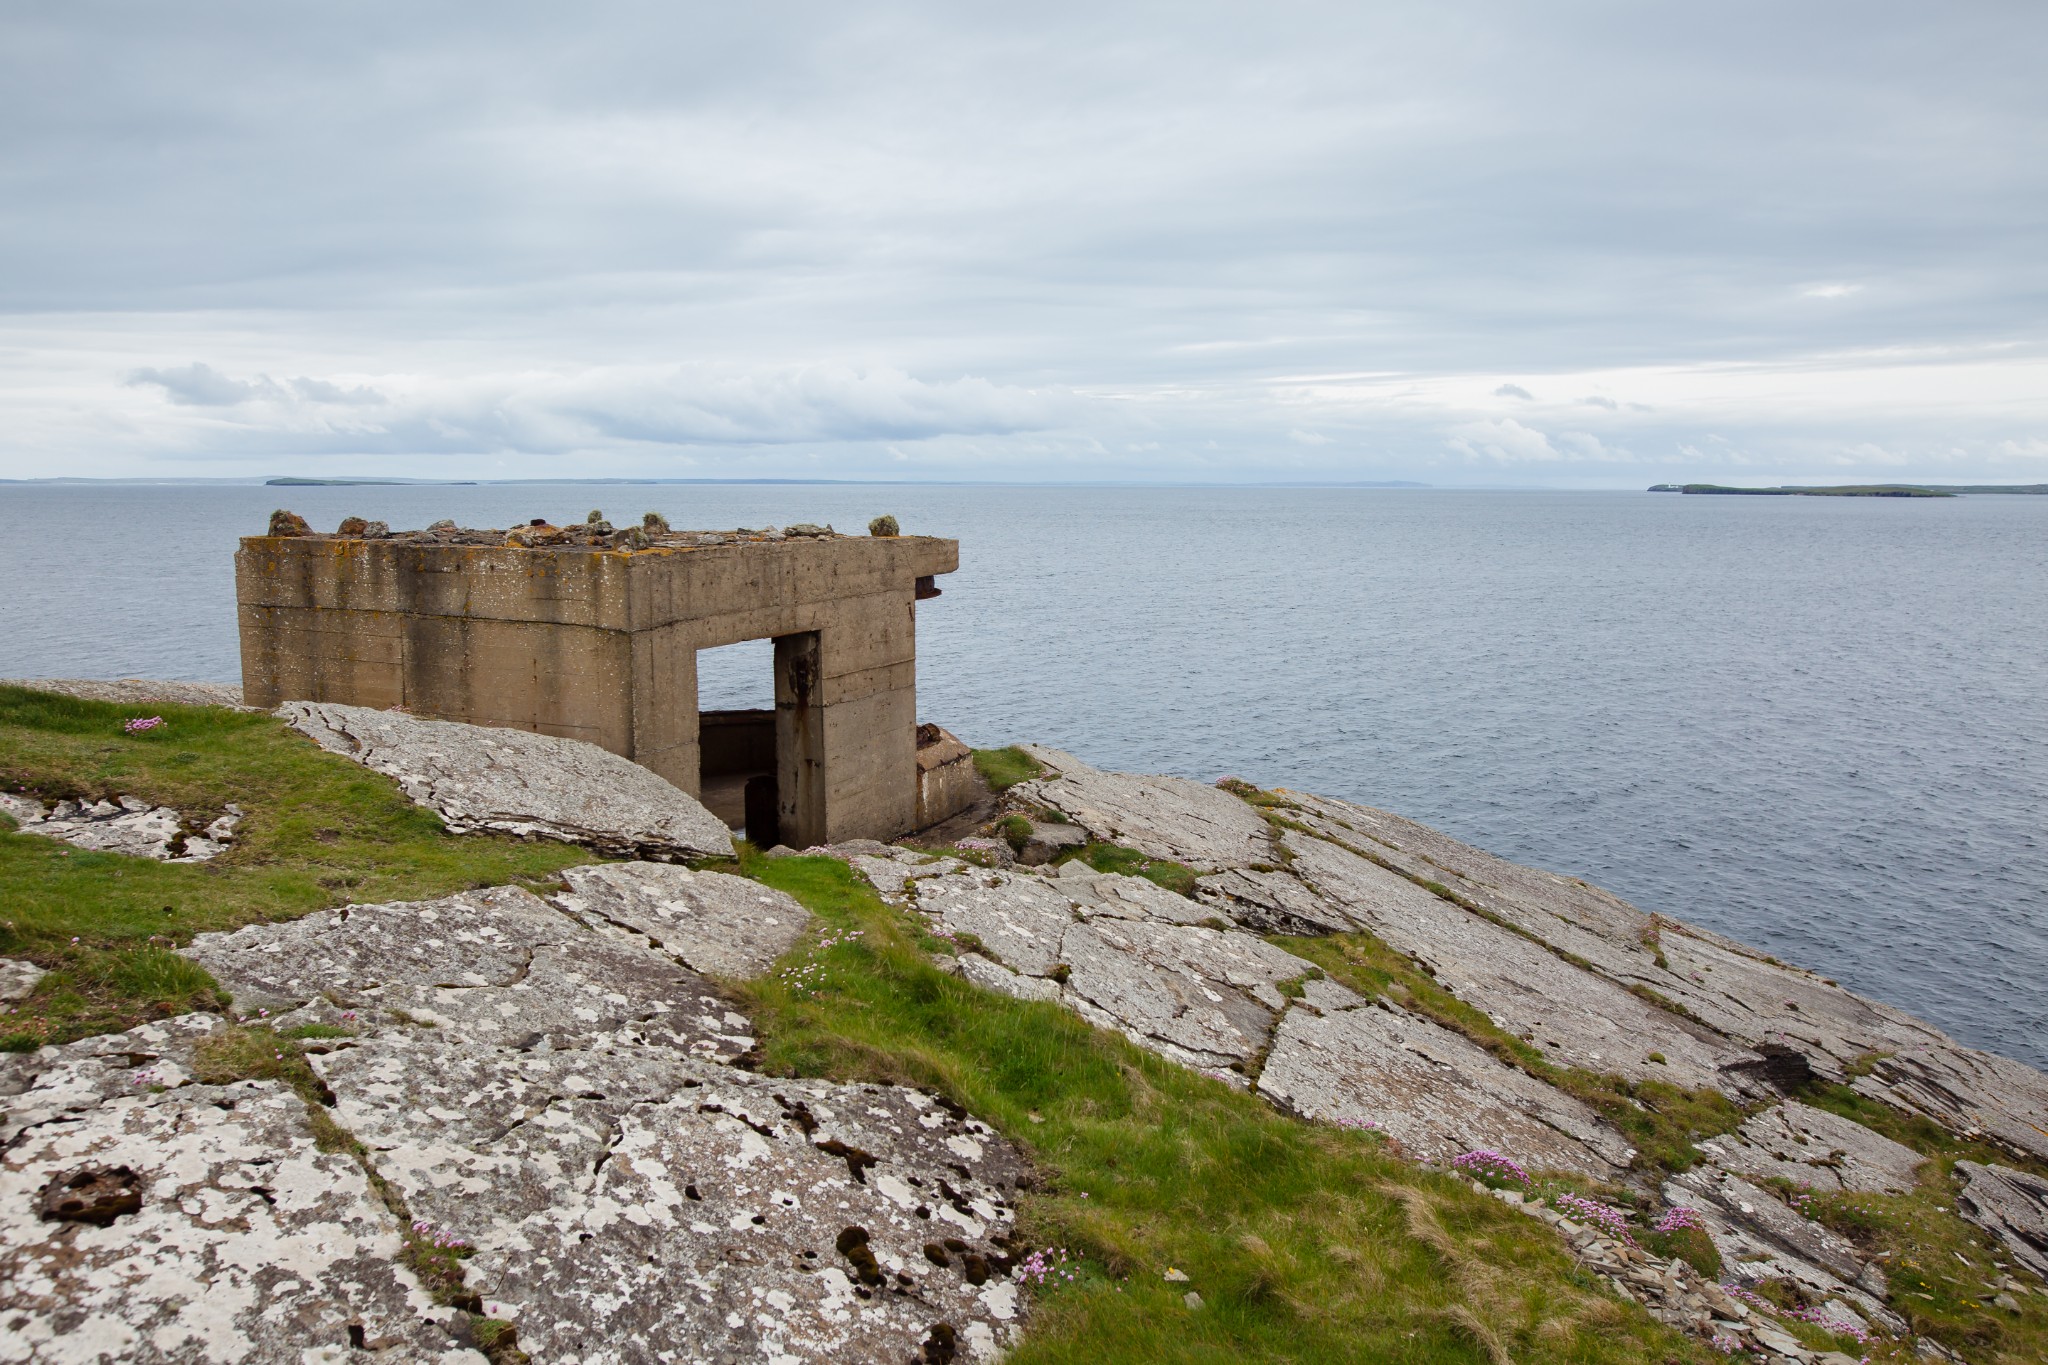 Remains of the Hoxa Battery at Hoxa Head, Orkney